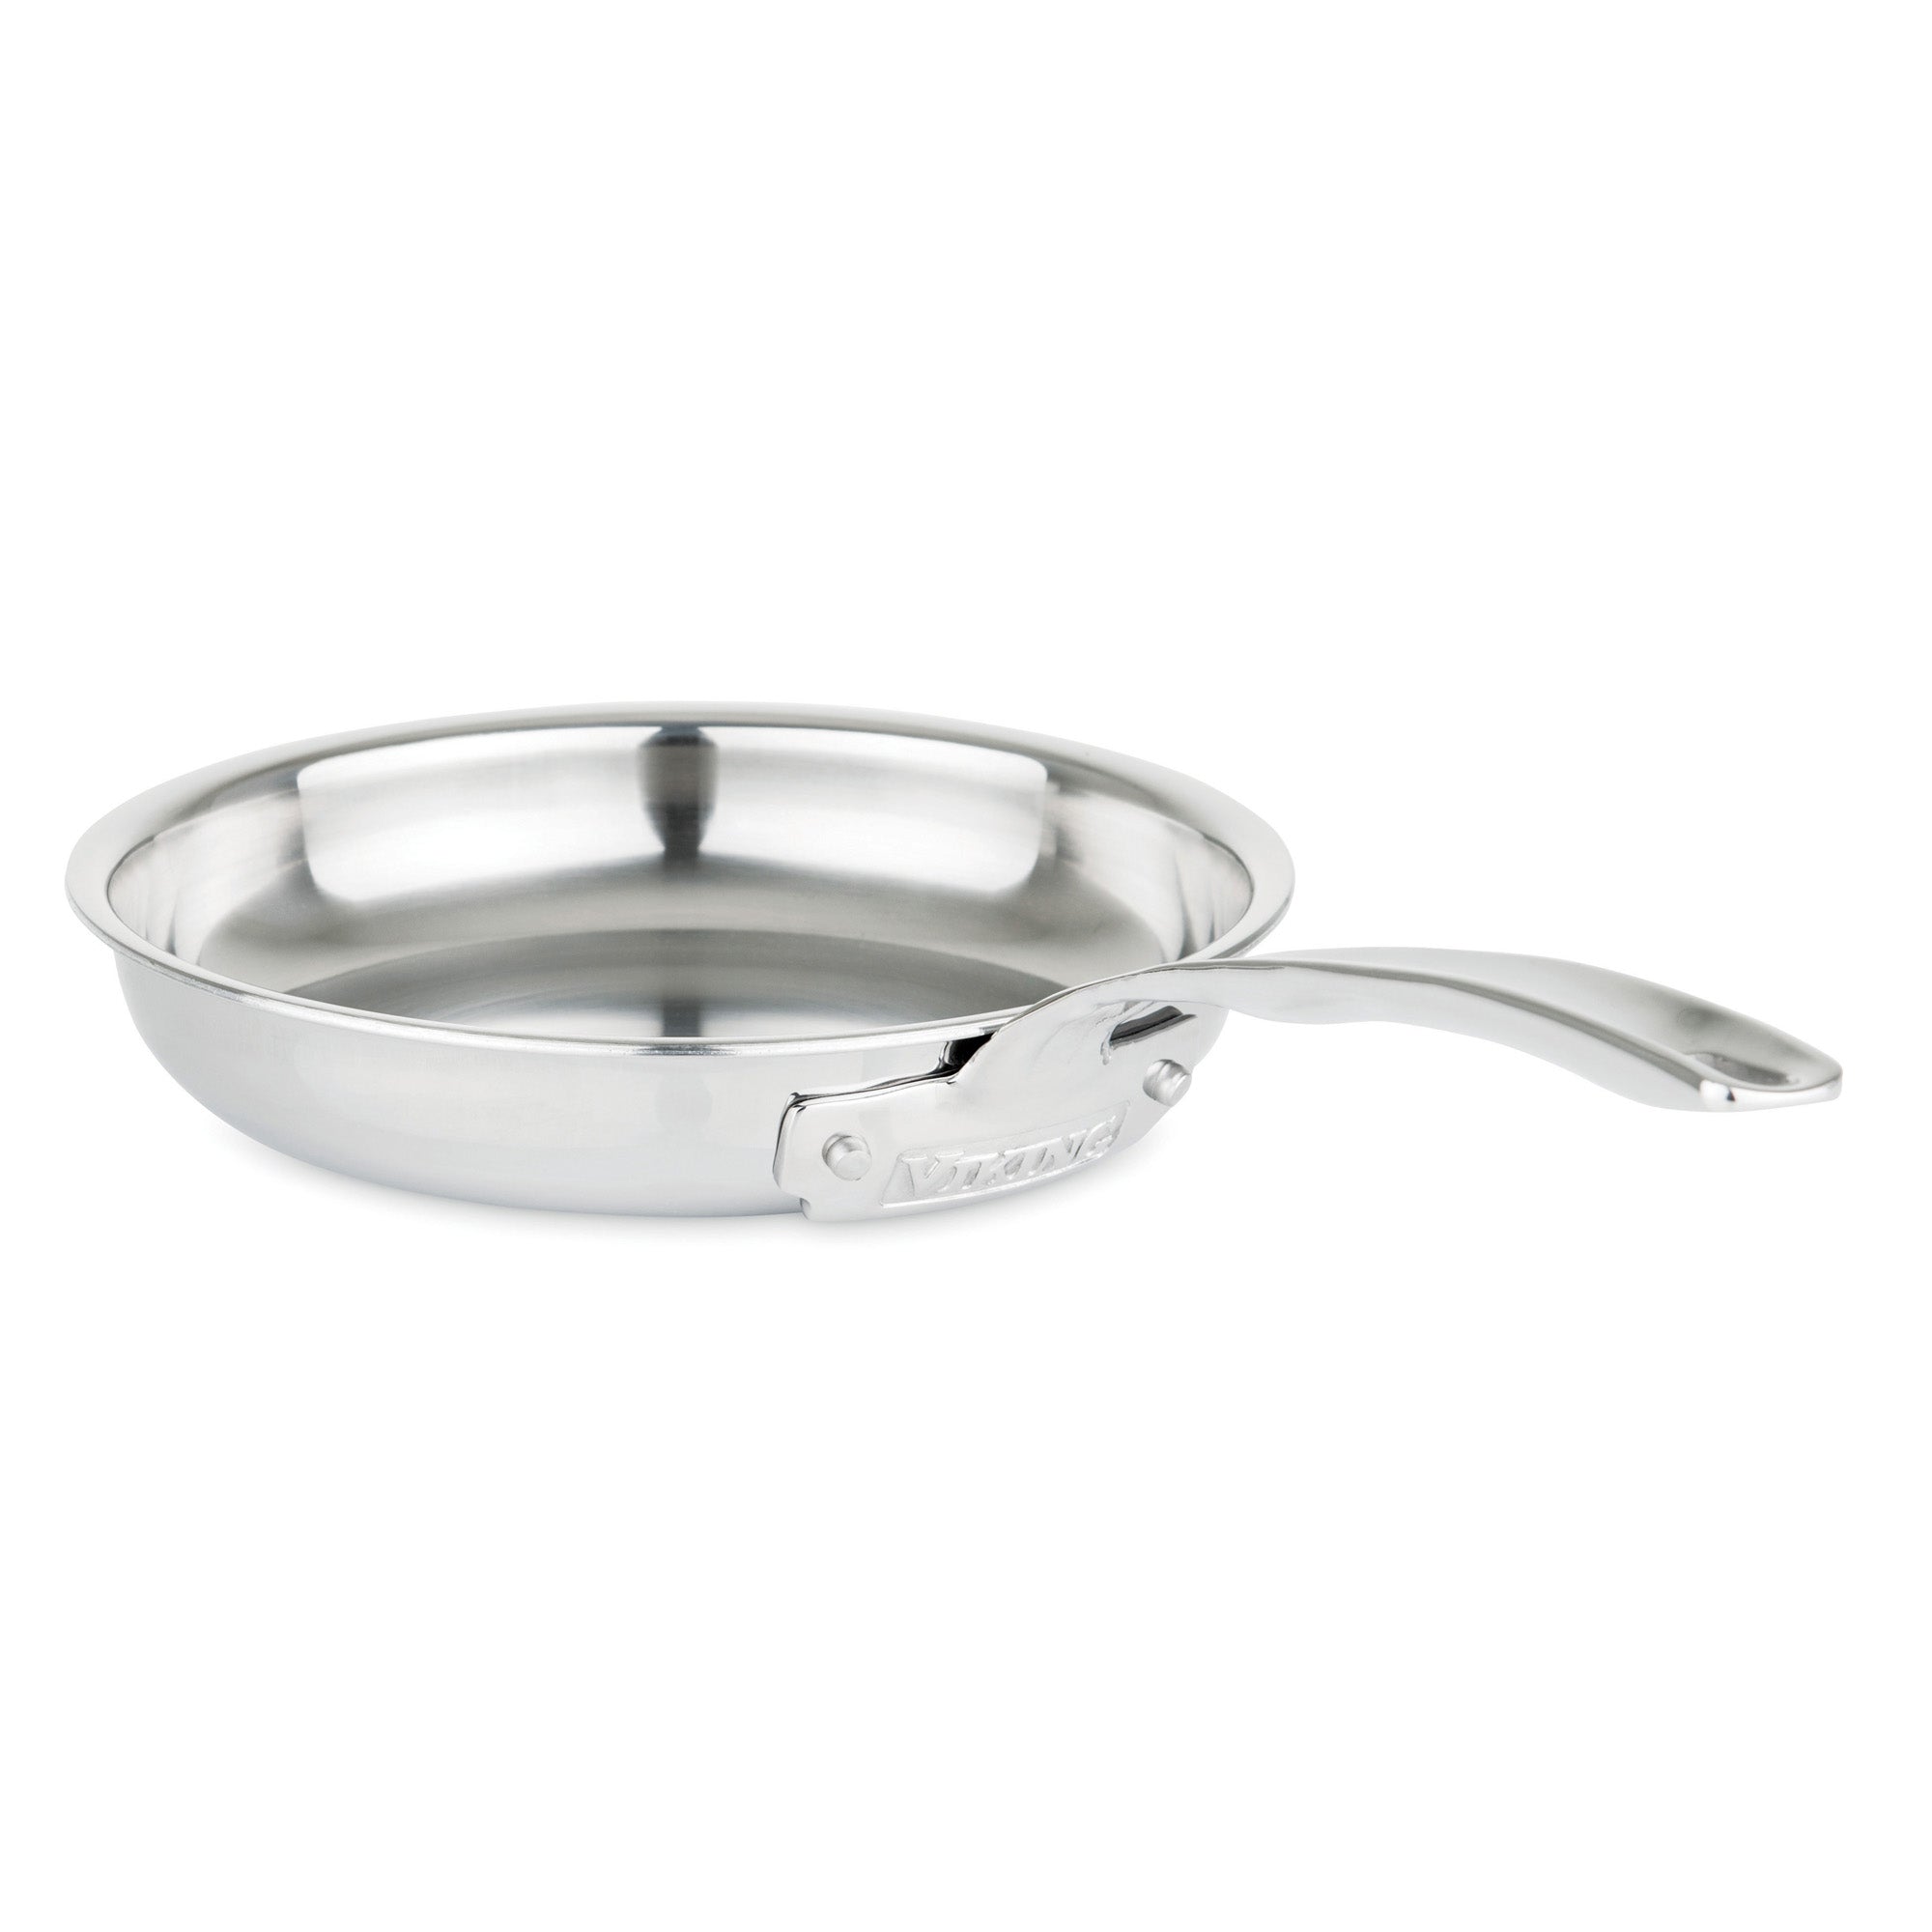 Fry Pan with Lid